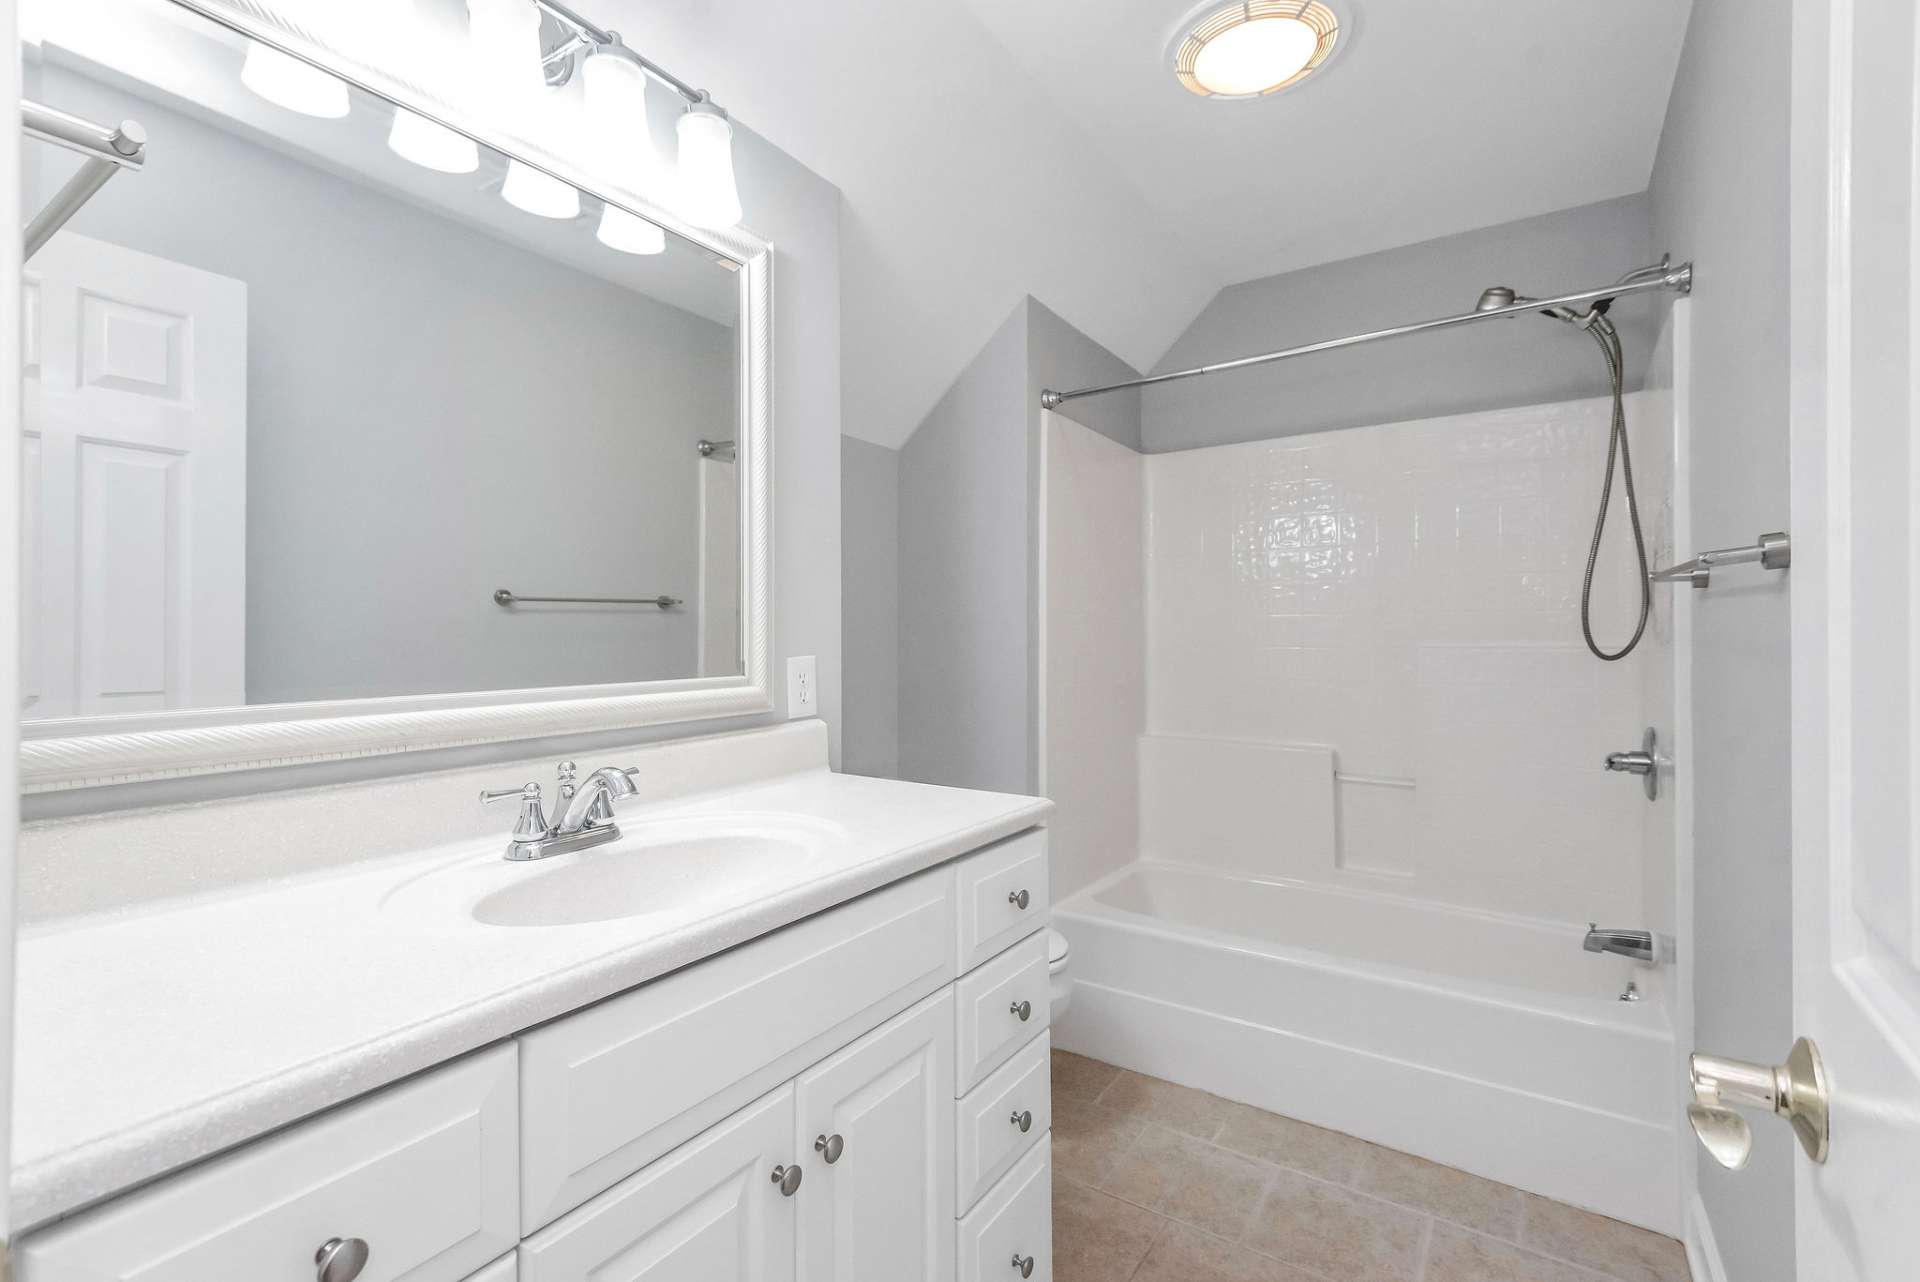 Upper level bedrooms 2 & 3 share this full bath which offers a ceramic tile floor and a fiberglass tub/shower combination, providing a convenient and versatile bathing option for residents and guests alike.